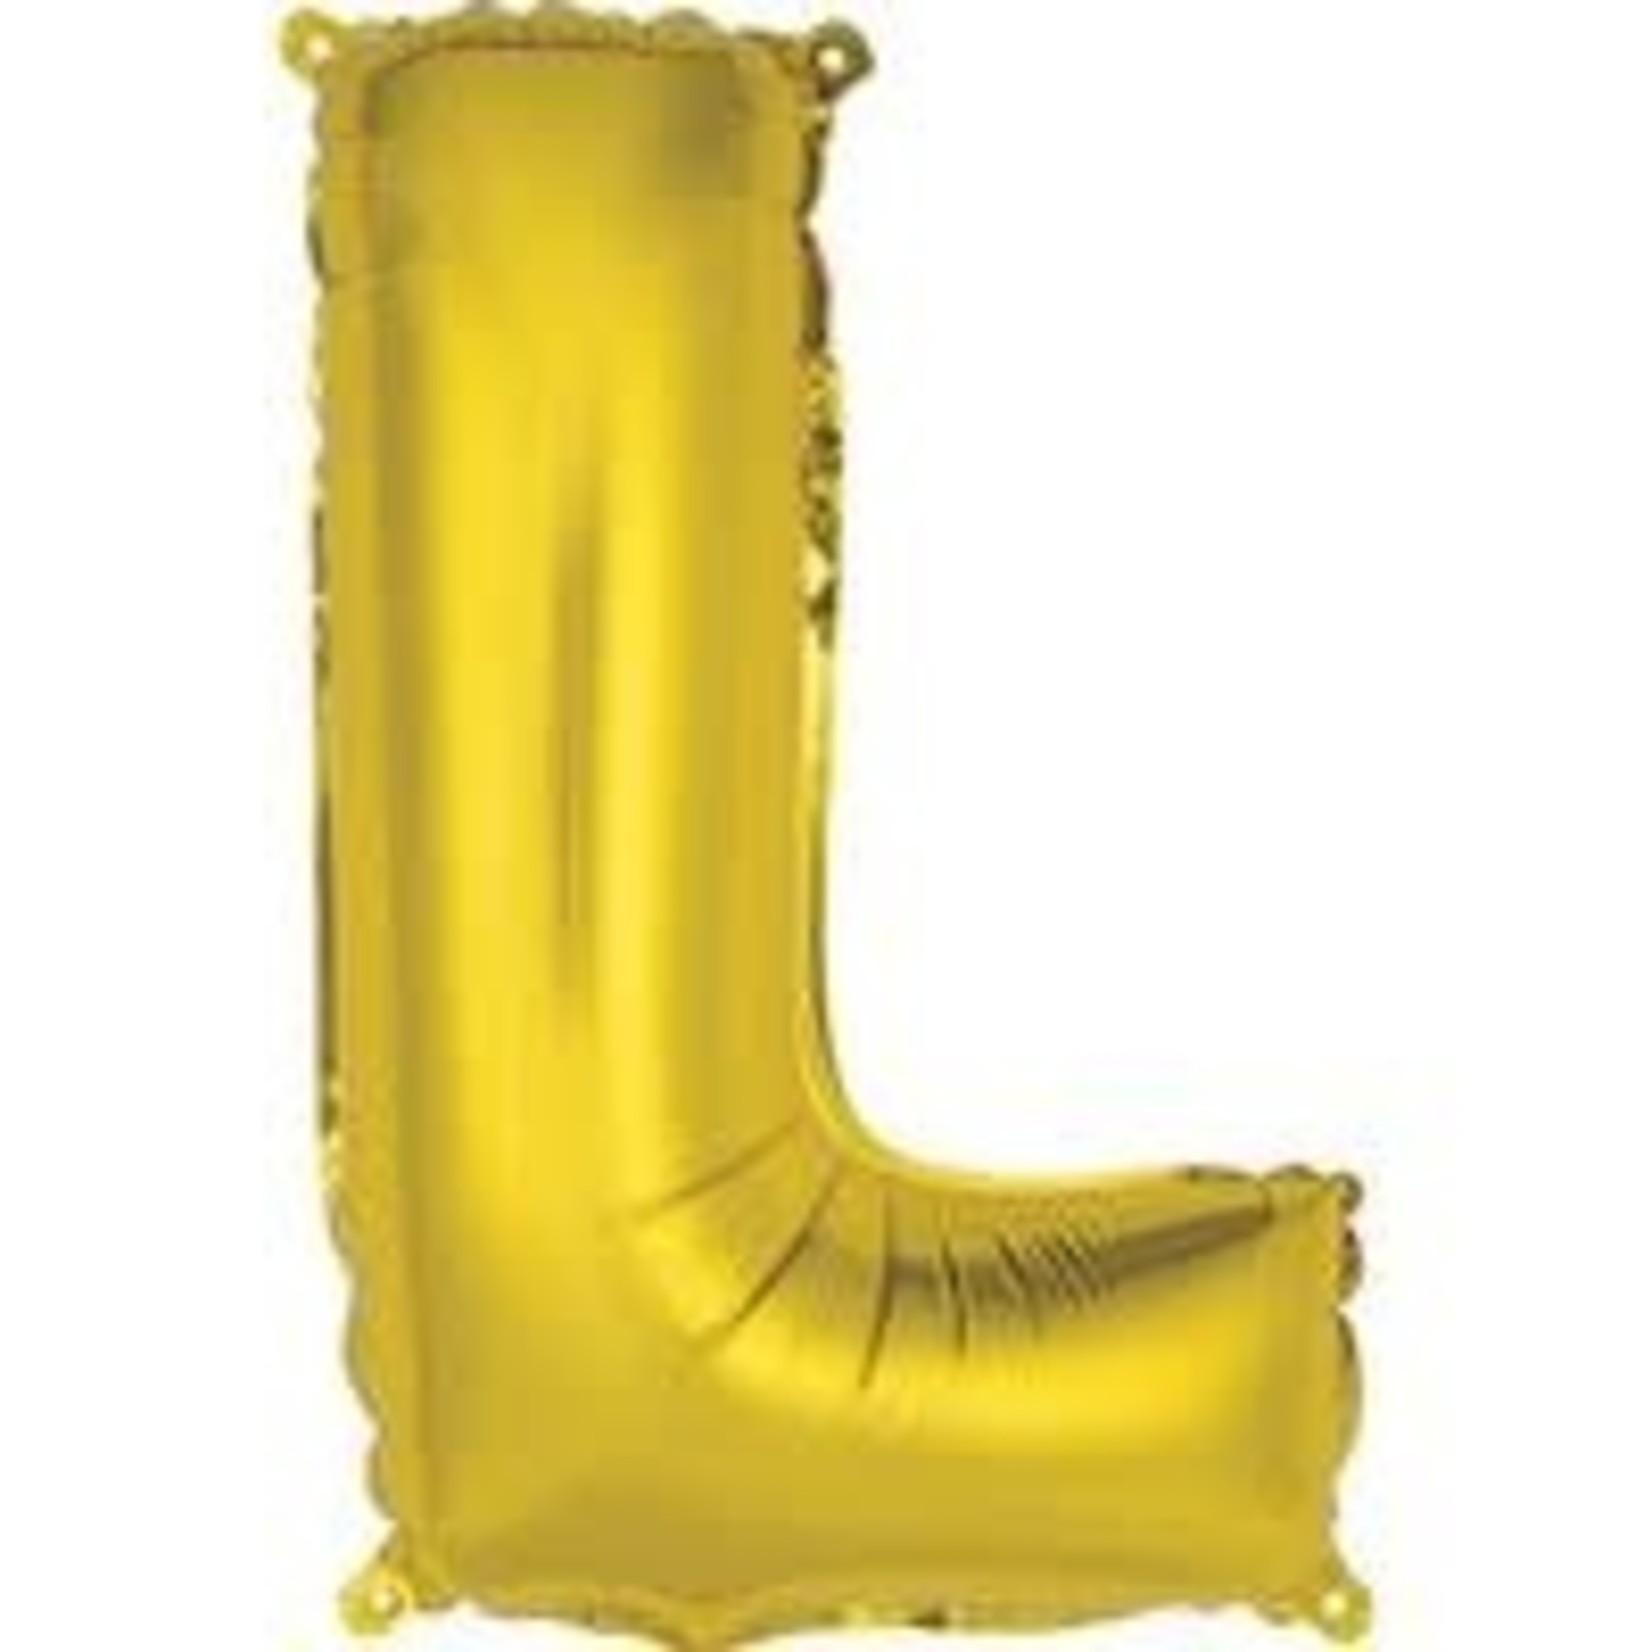 unique 14" Gold "L" Air-Filled Mylar Balloon - 1ct.